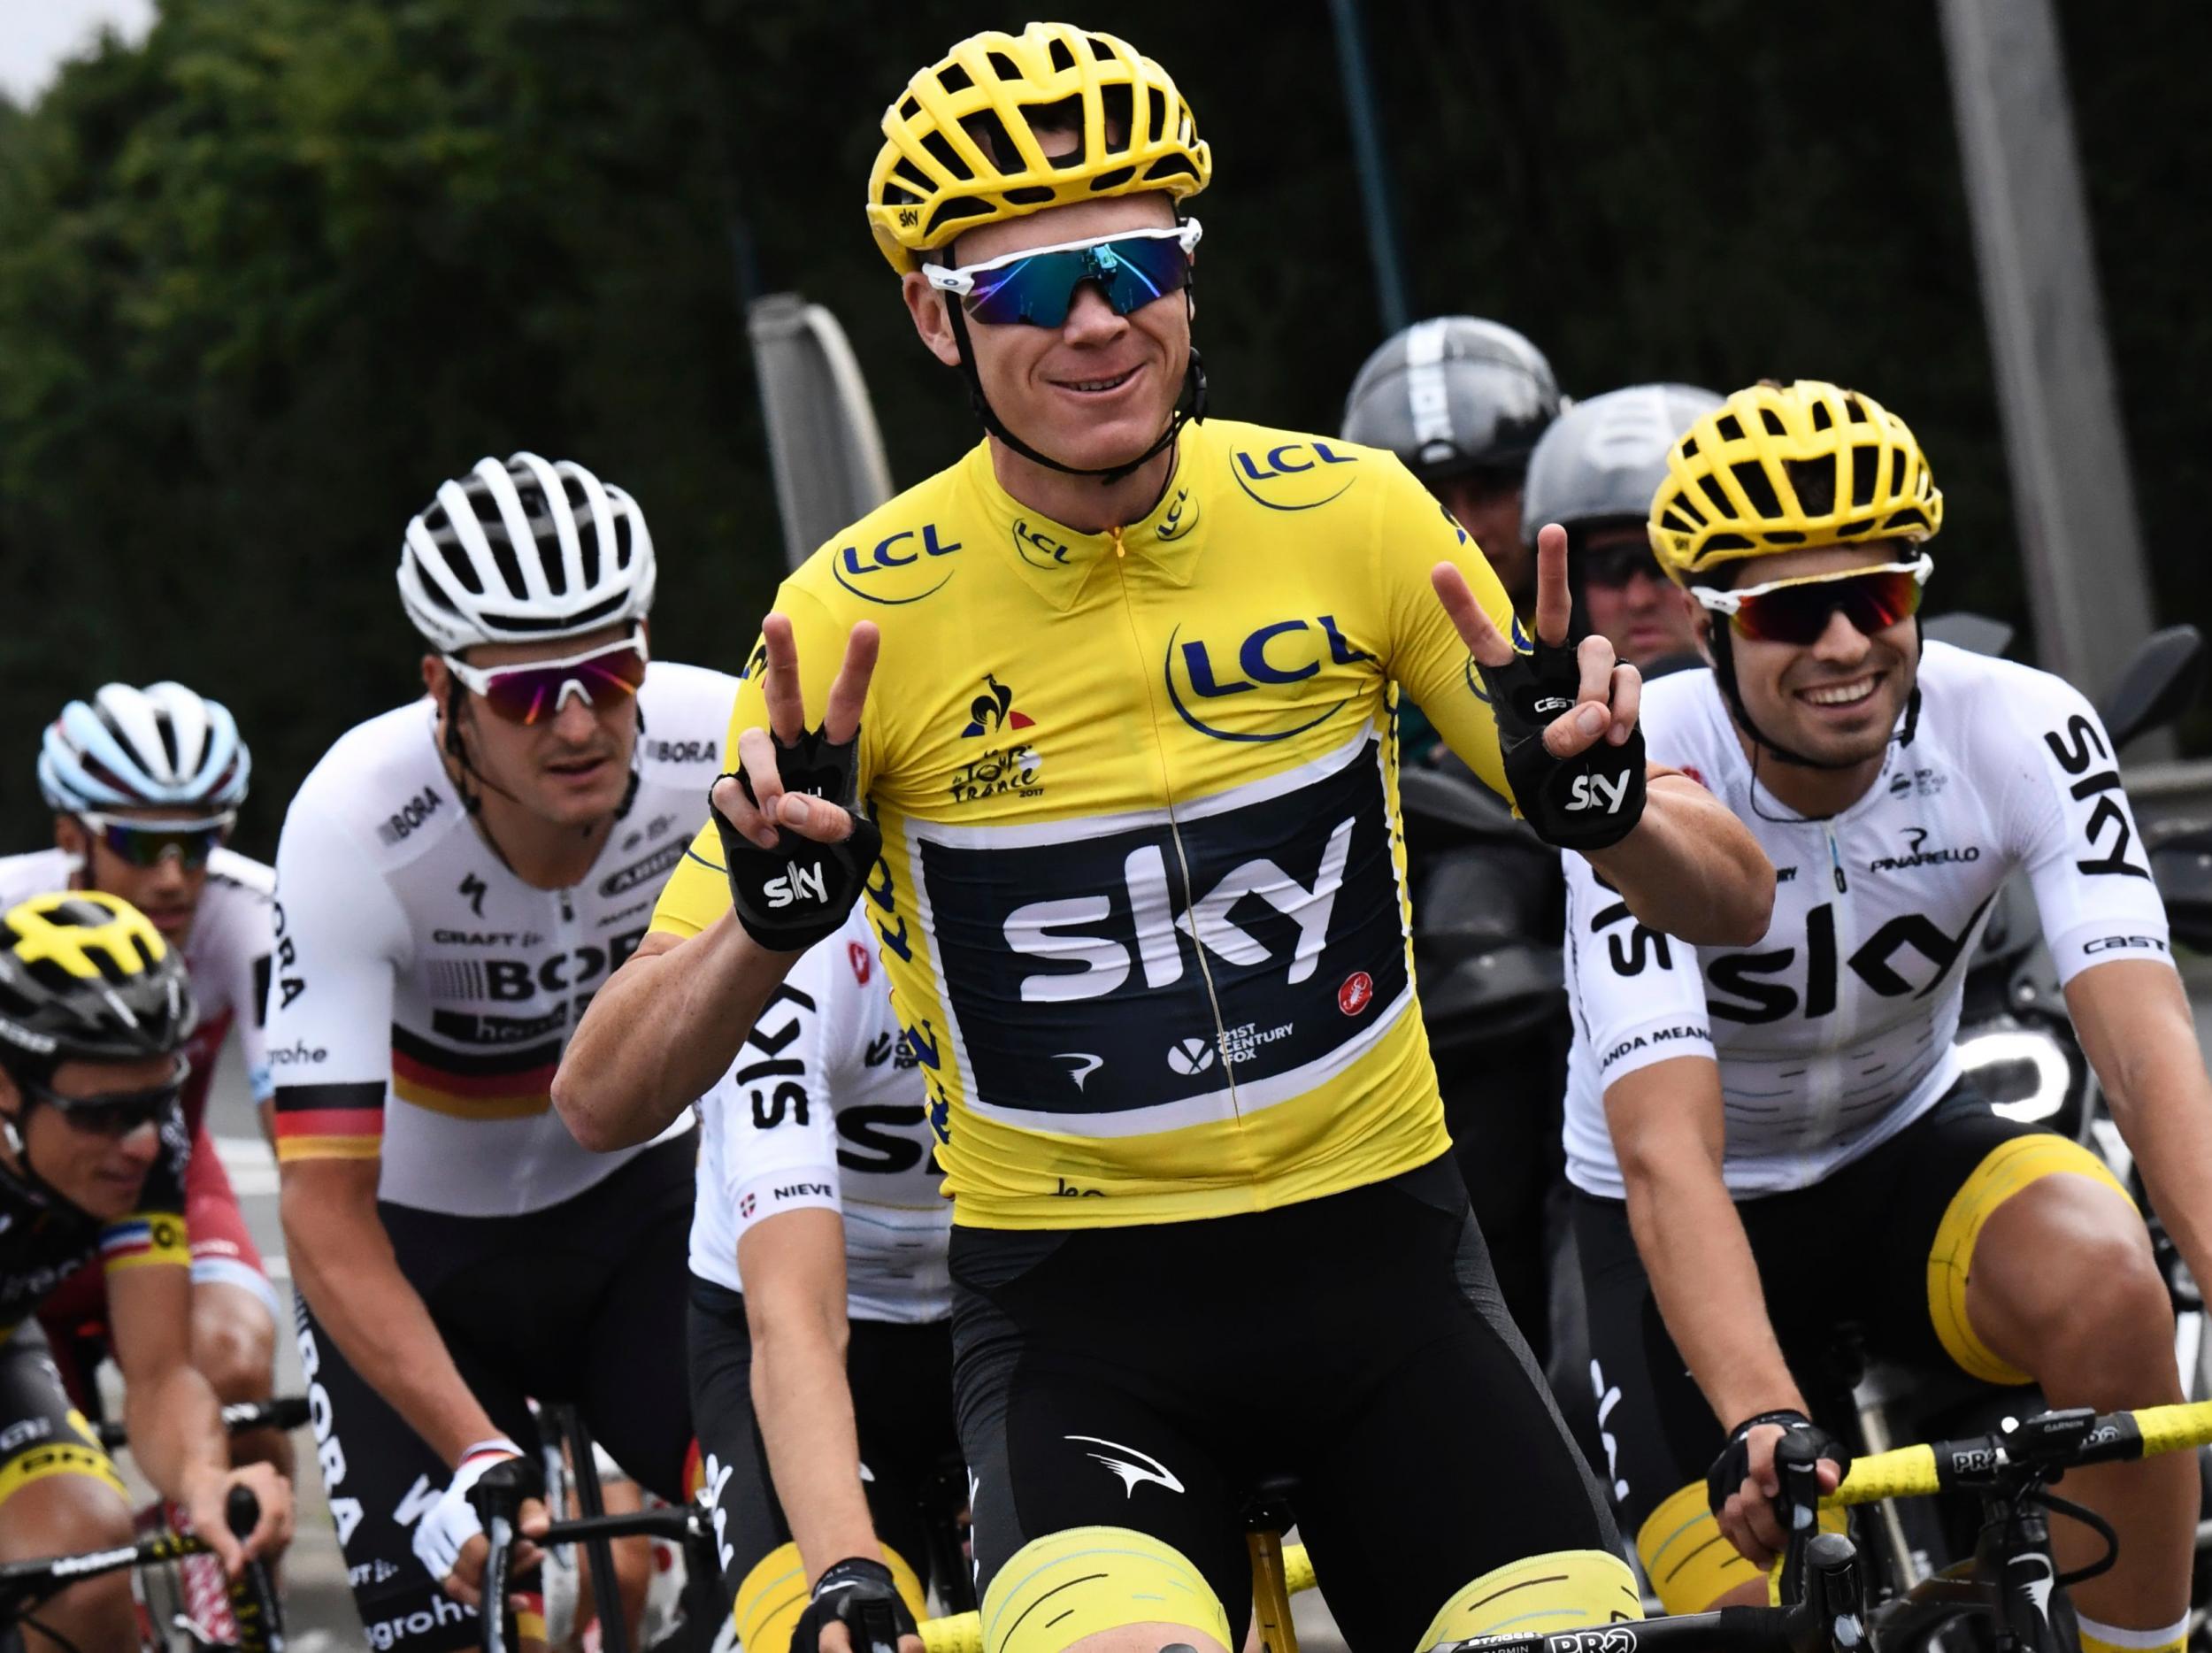 Froome won his fourth Tour de France title this summer